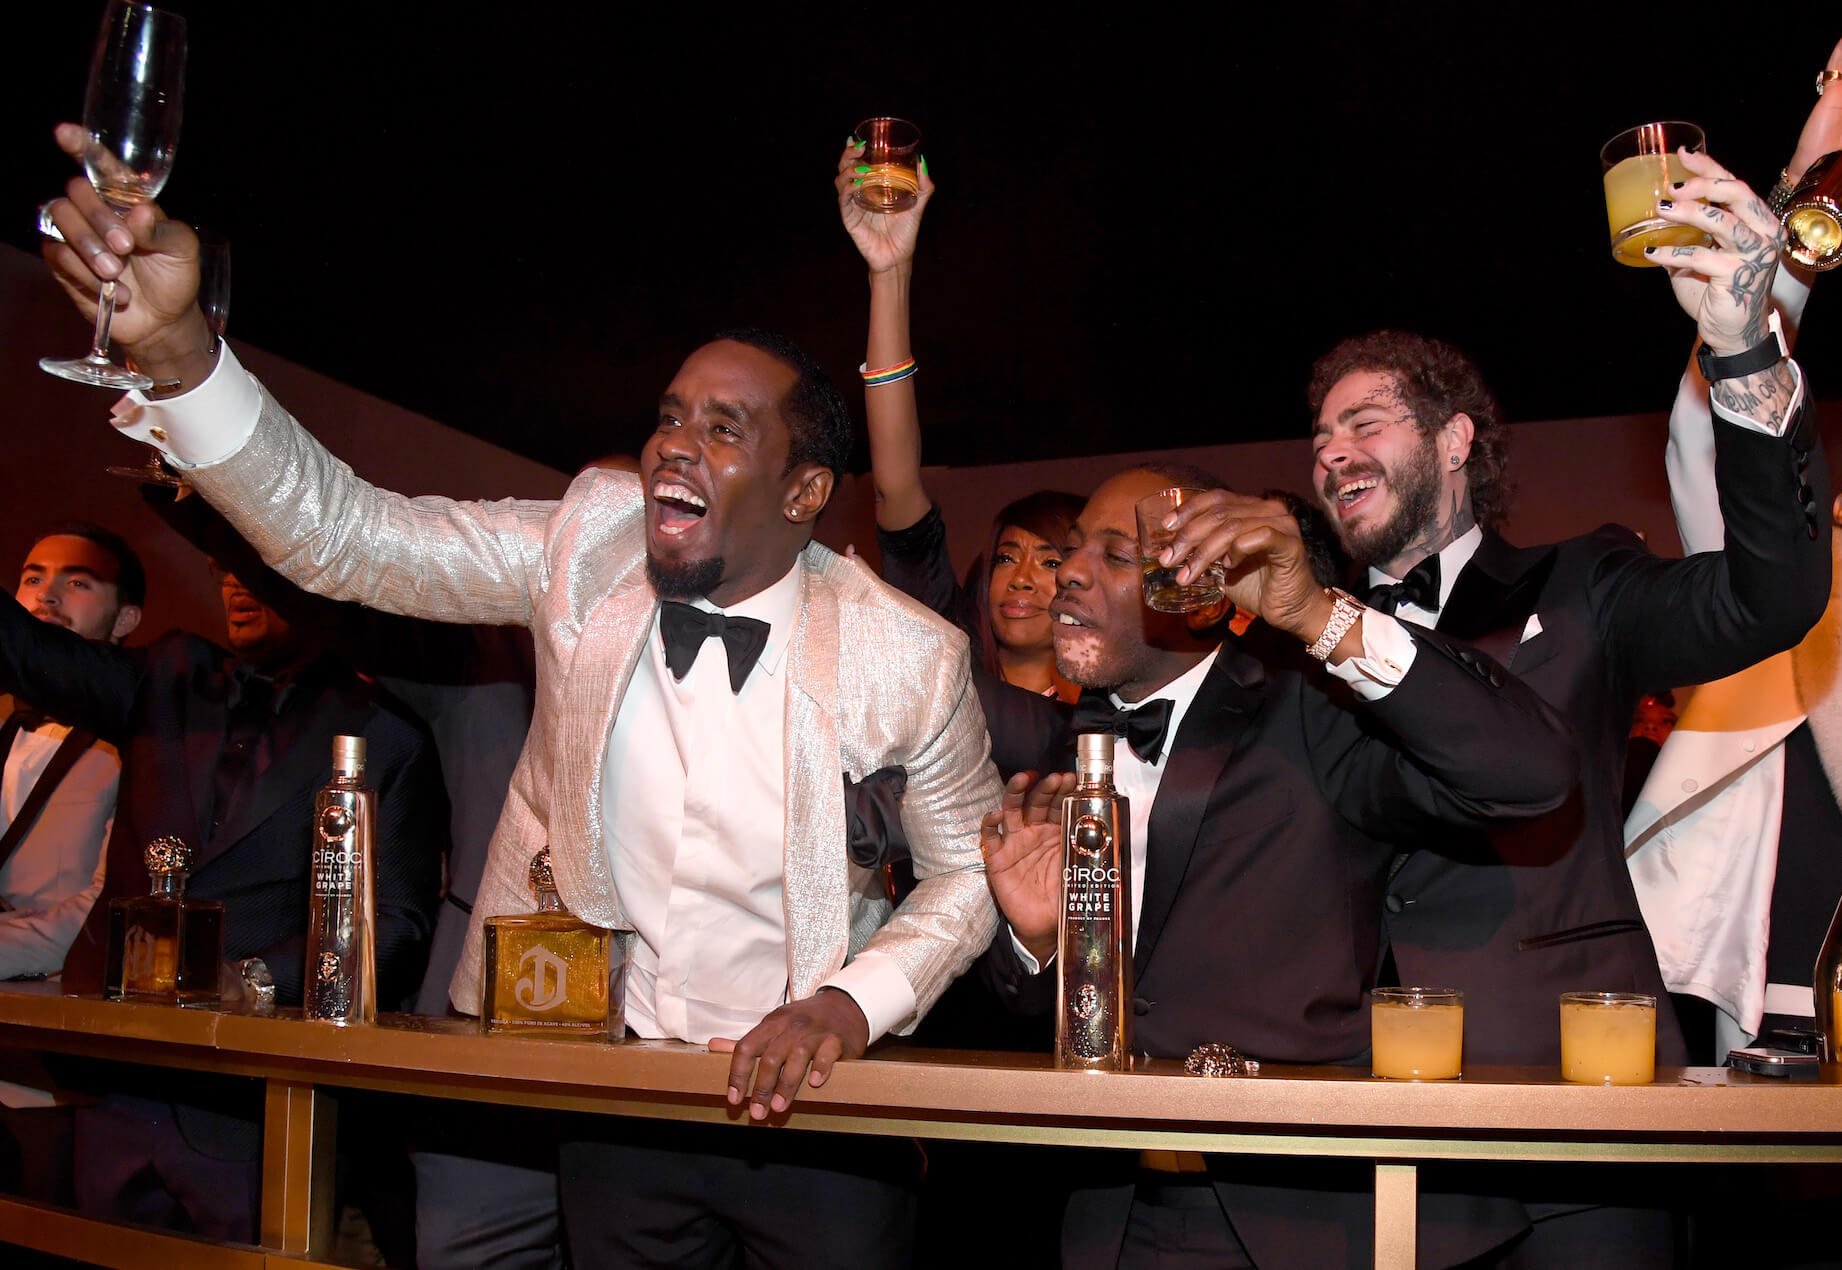 Sean 'P. Diddy' Combs wearing a white suit and holding up a drink for his 50th birthday. Post Malone and other celebrities raise their drinks in the background.